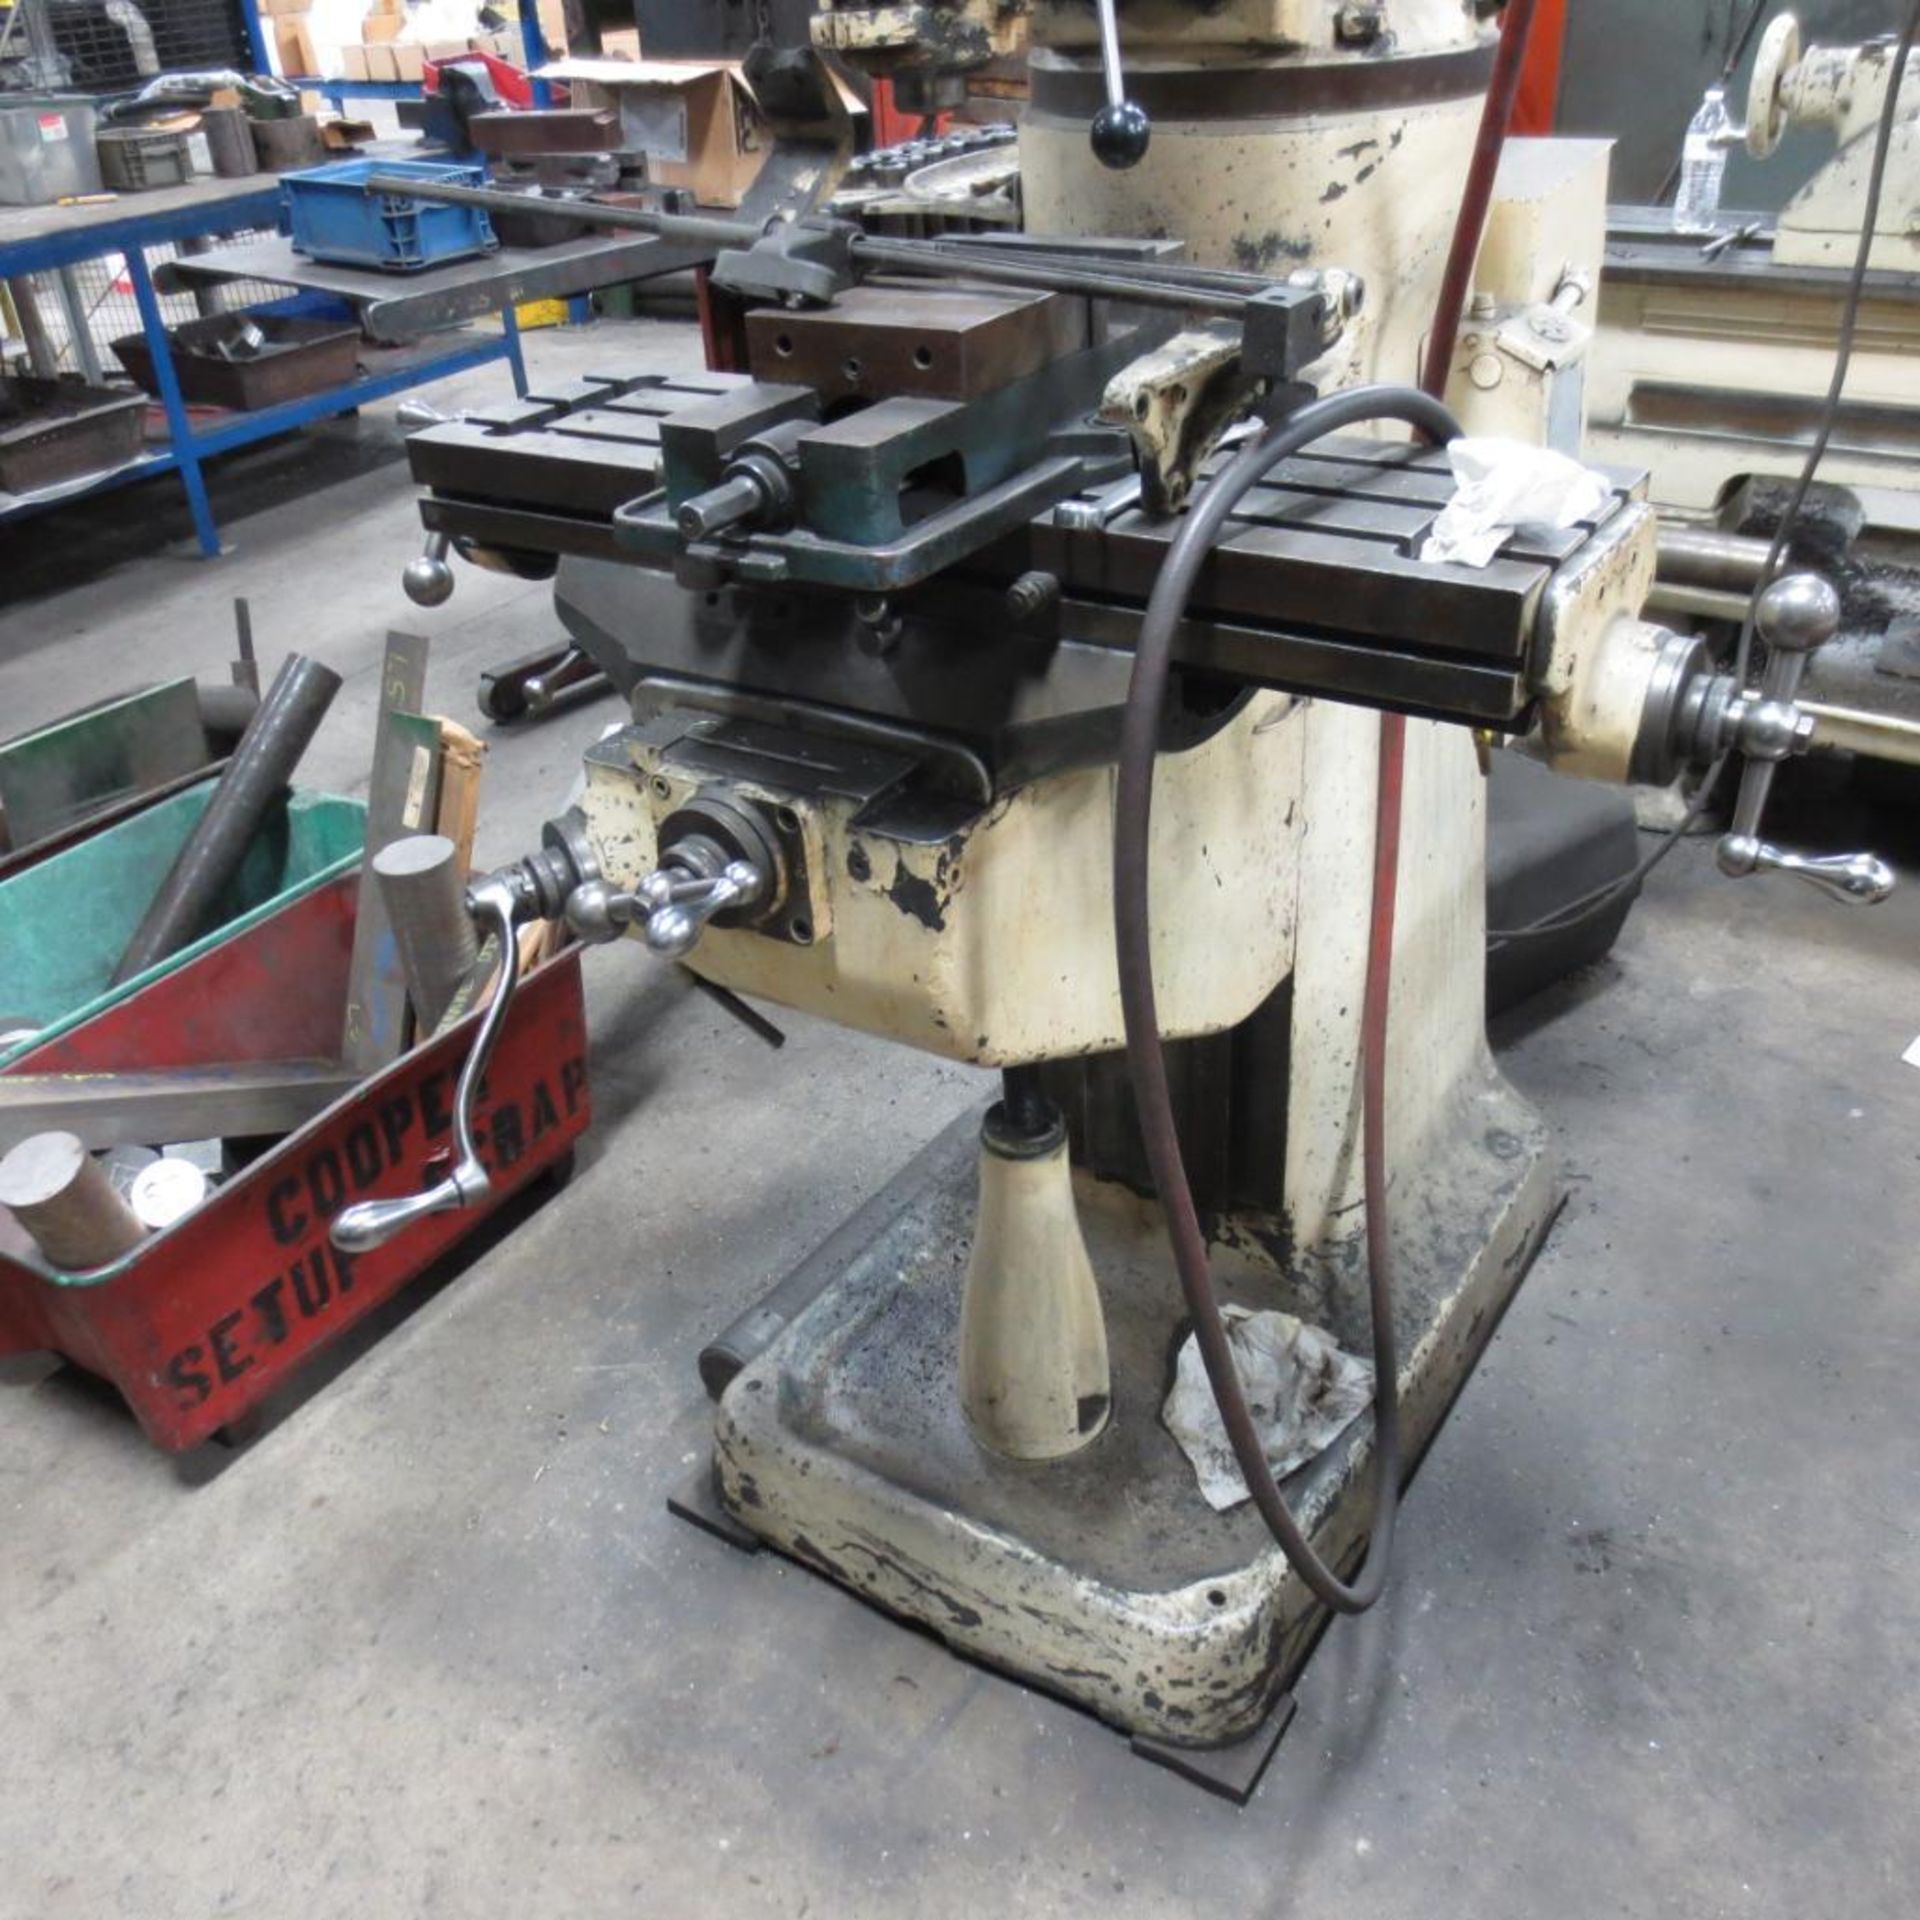 Bridgeport Vertical Milling Machine, 9" X 42" T Slot Table, 60 to 4,200 Spindle Speeds, 1 1/2 HP, 3 - Image 5 of 5